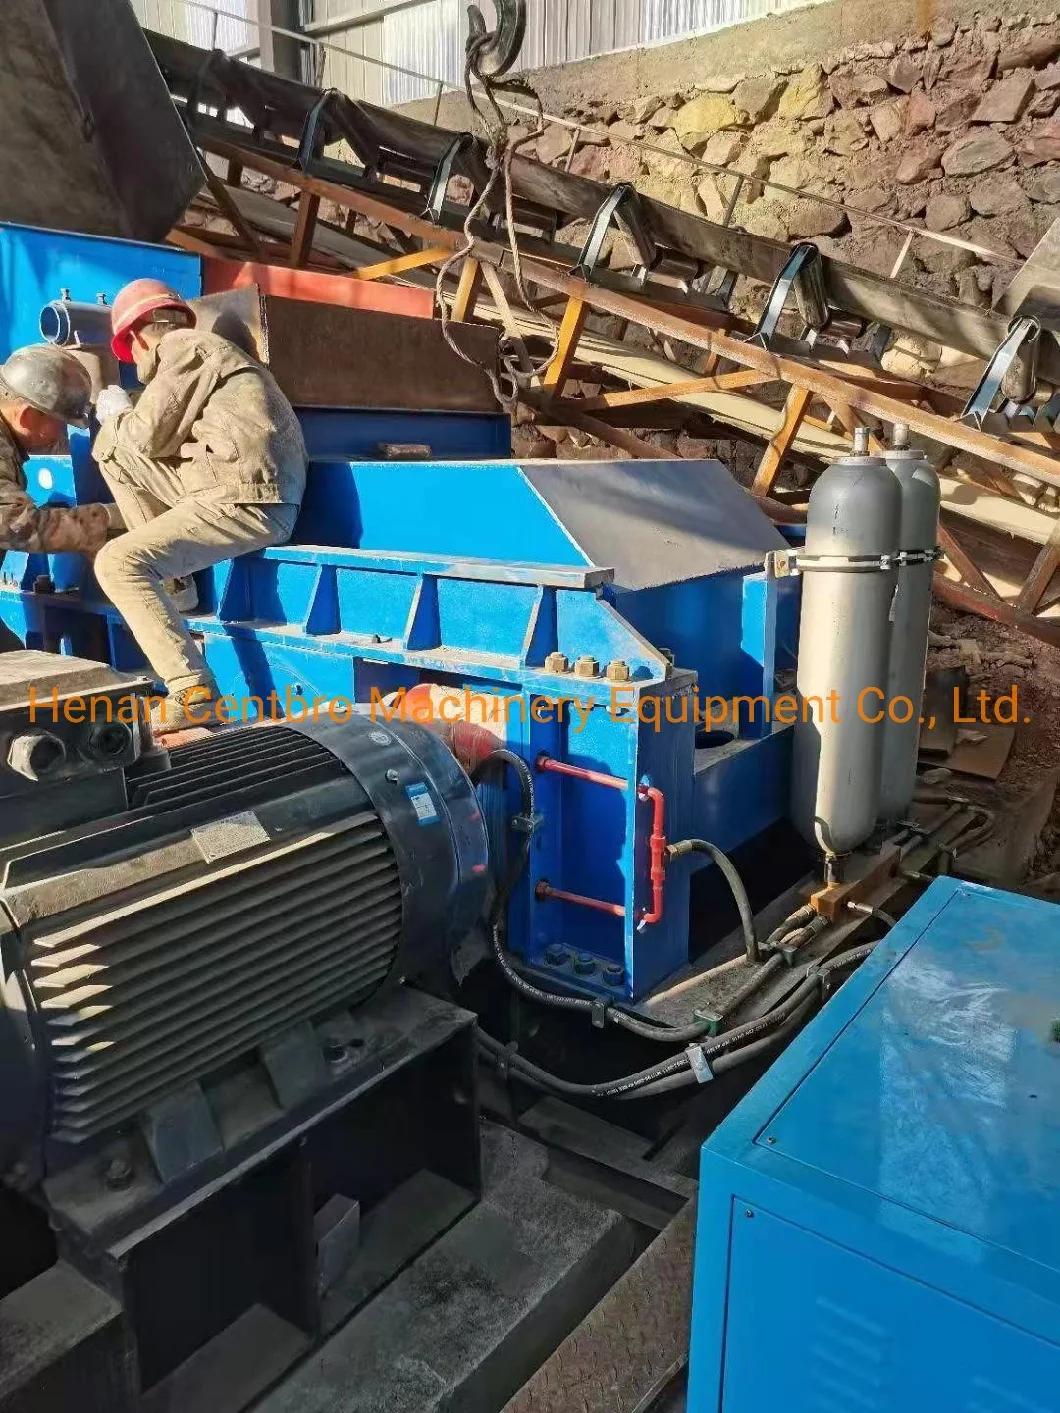 China Manufacturer Roller Crusher Hydraulic Raymond Mill Crusher for Sale